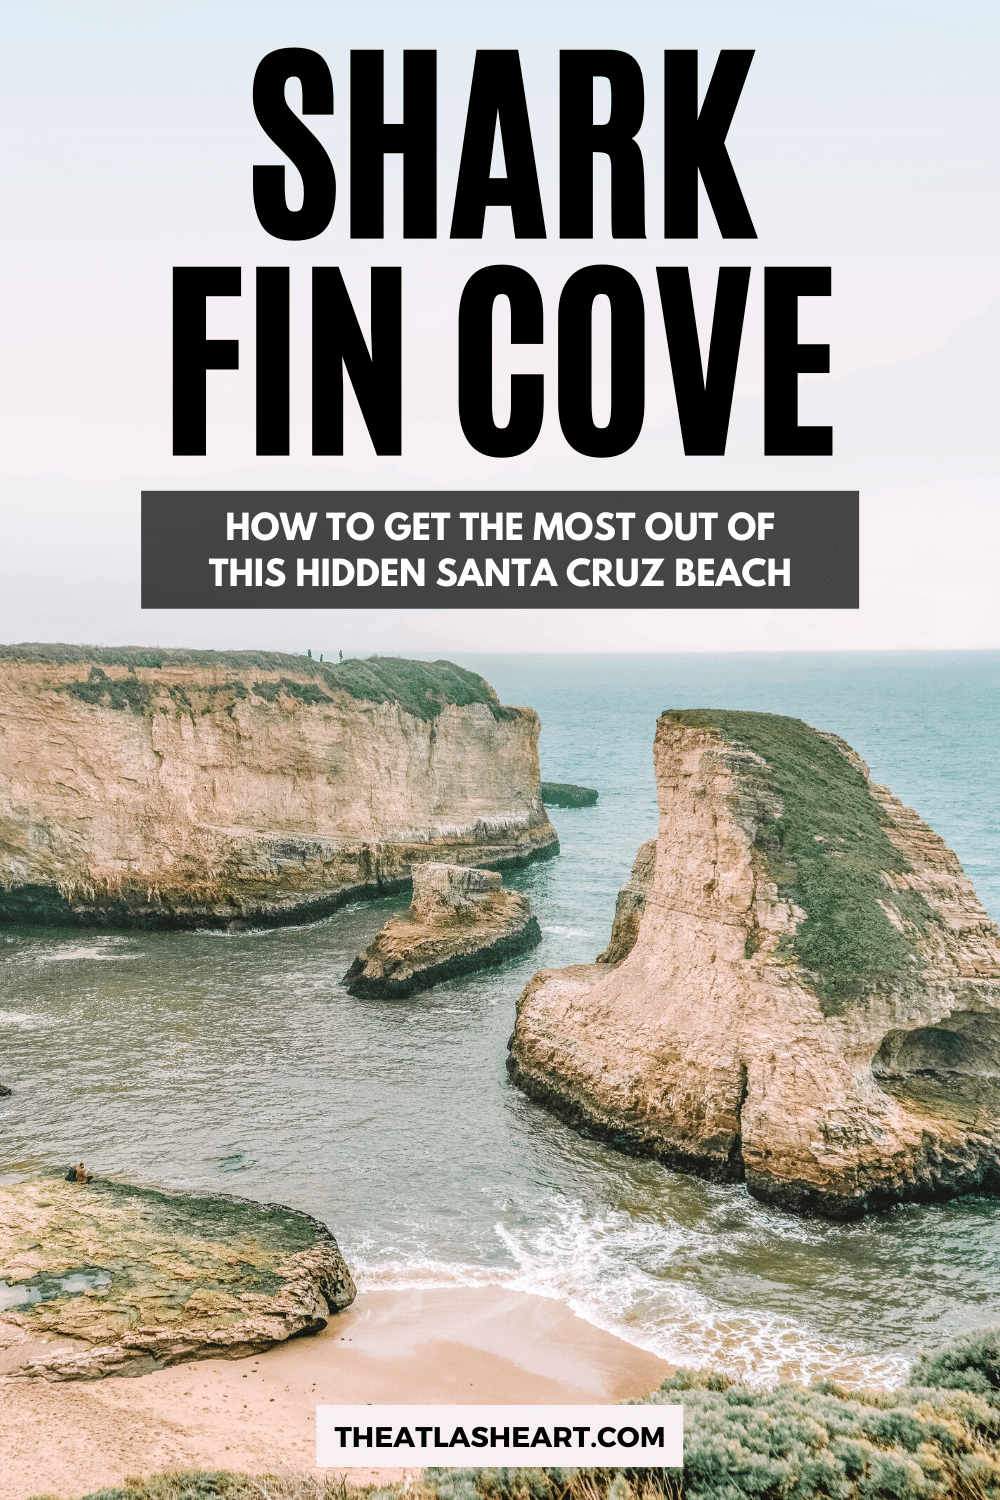 Shark Fin Cove: How to Get the Most Out of This Hidden Beach